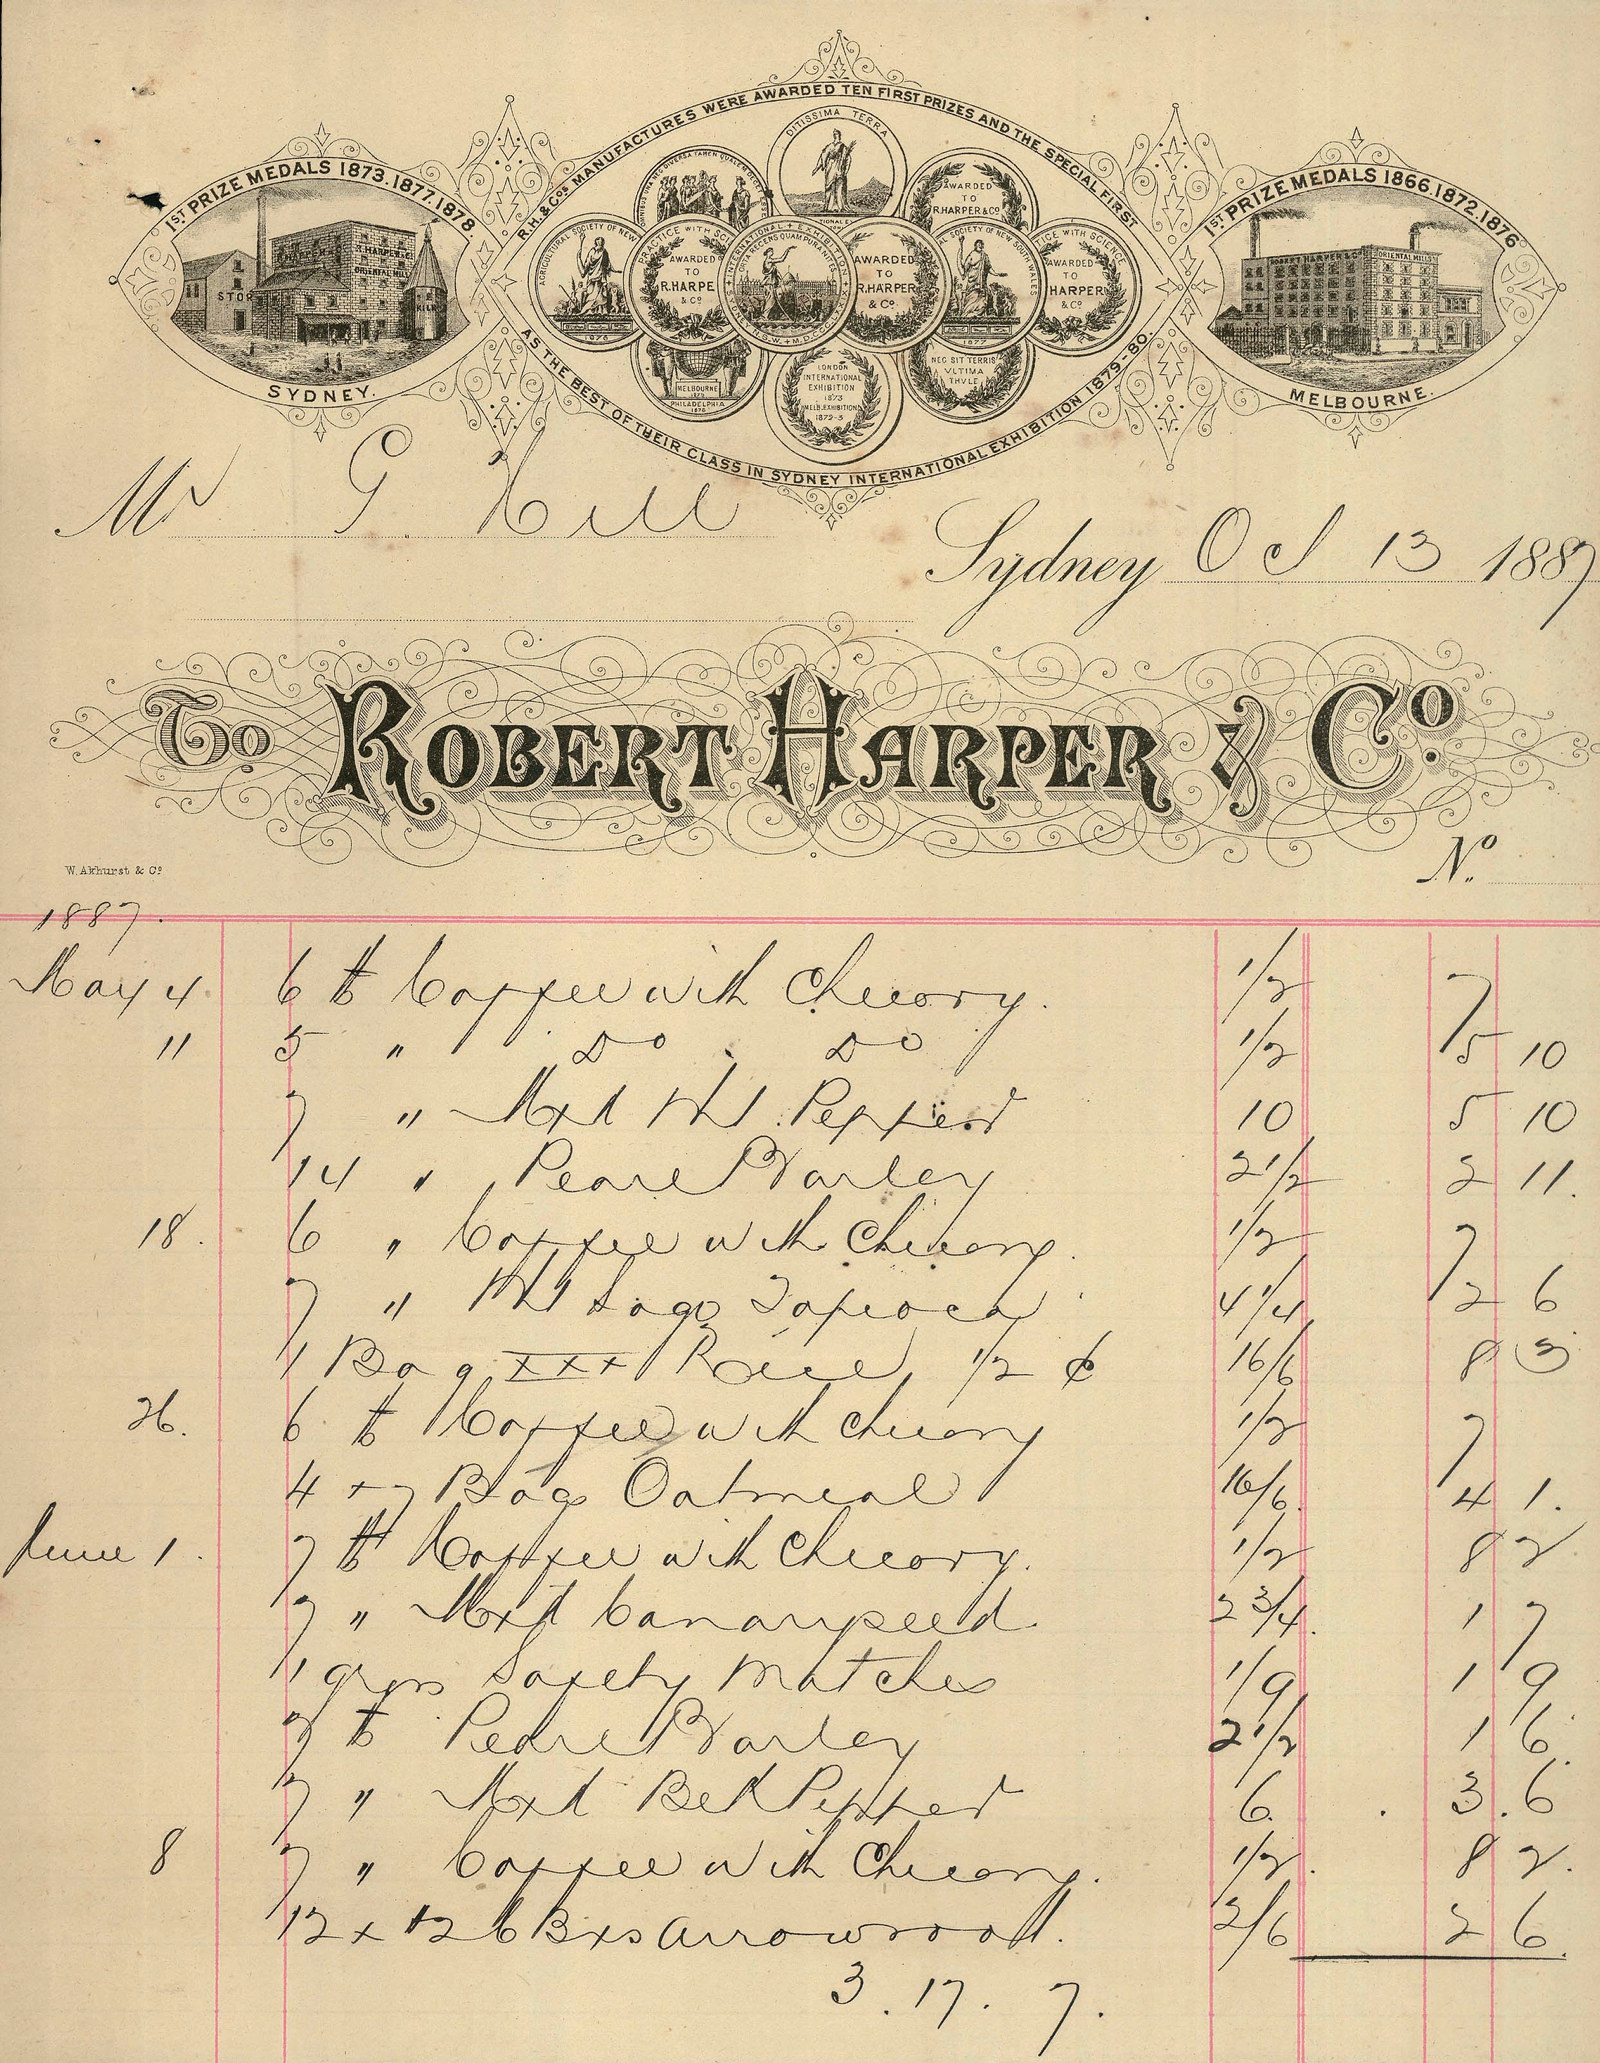  Goods supplied by Robert Harper and Co to grocer George Hill